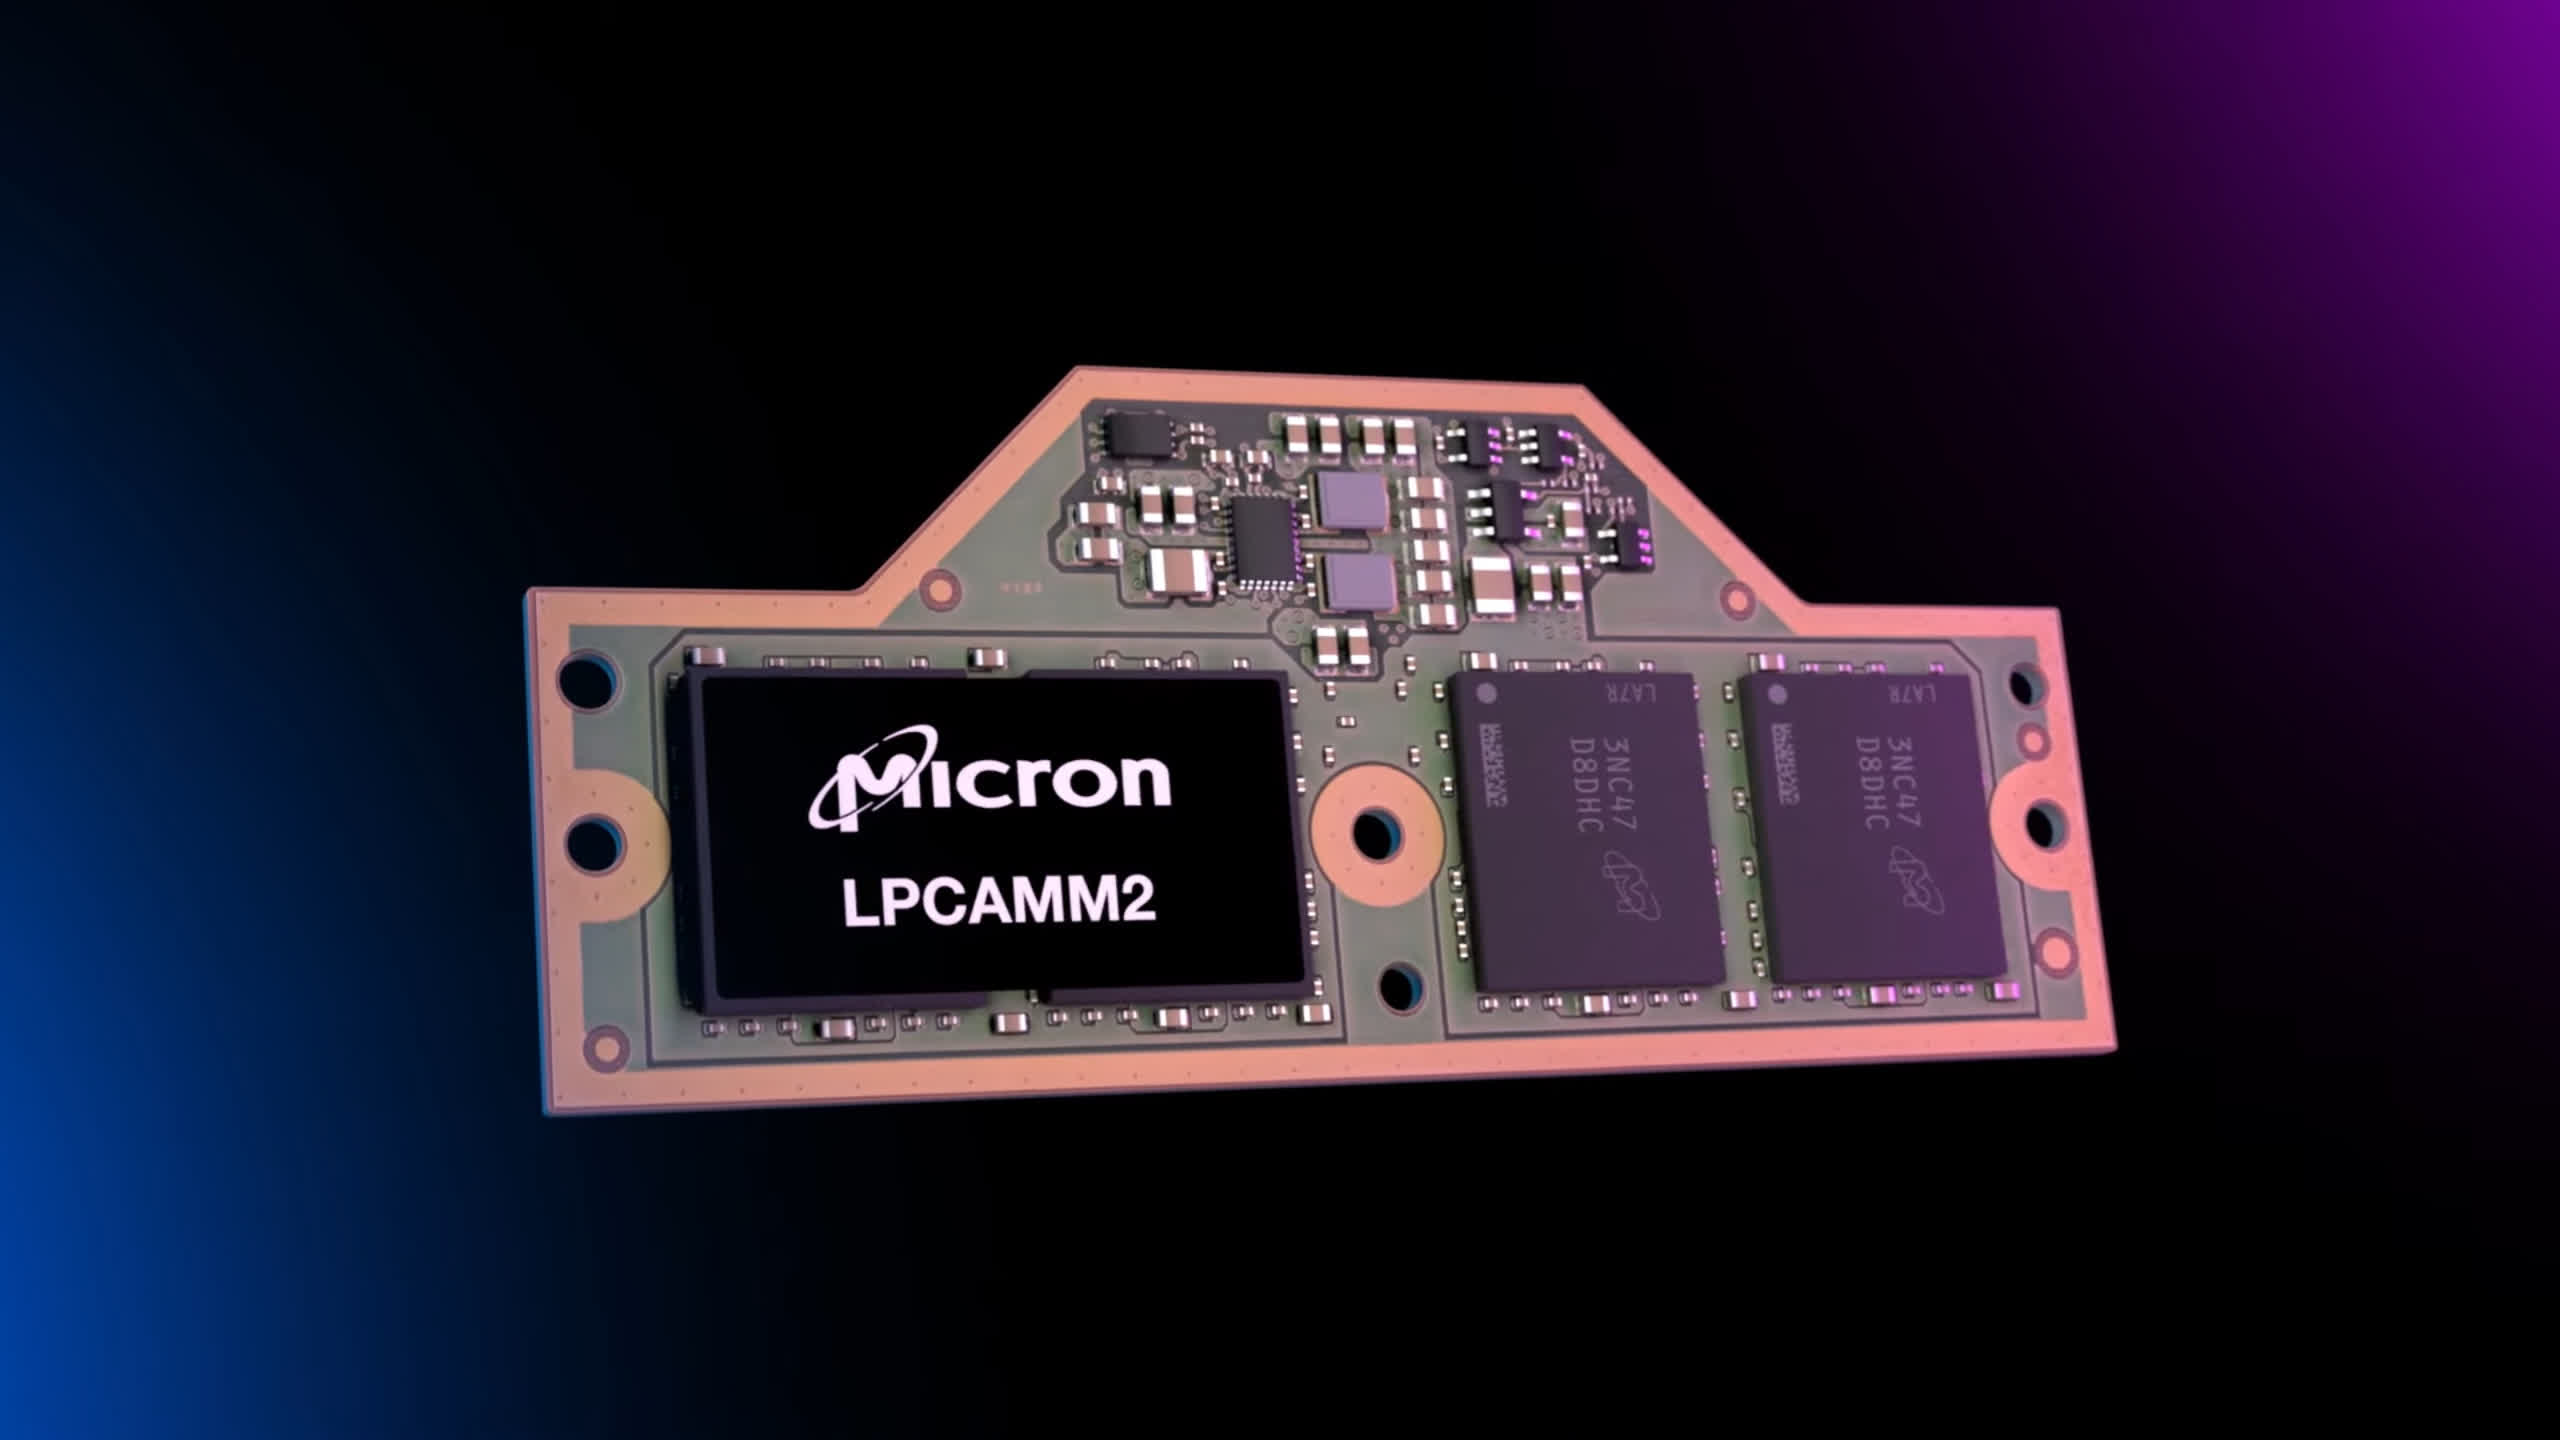 Micron announces first LPCAMM2 memory modules to improve laptop serviceability and battery life